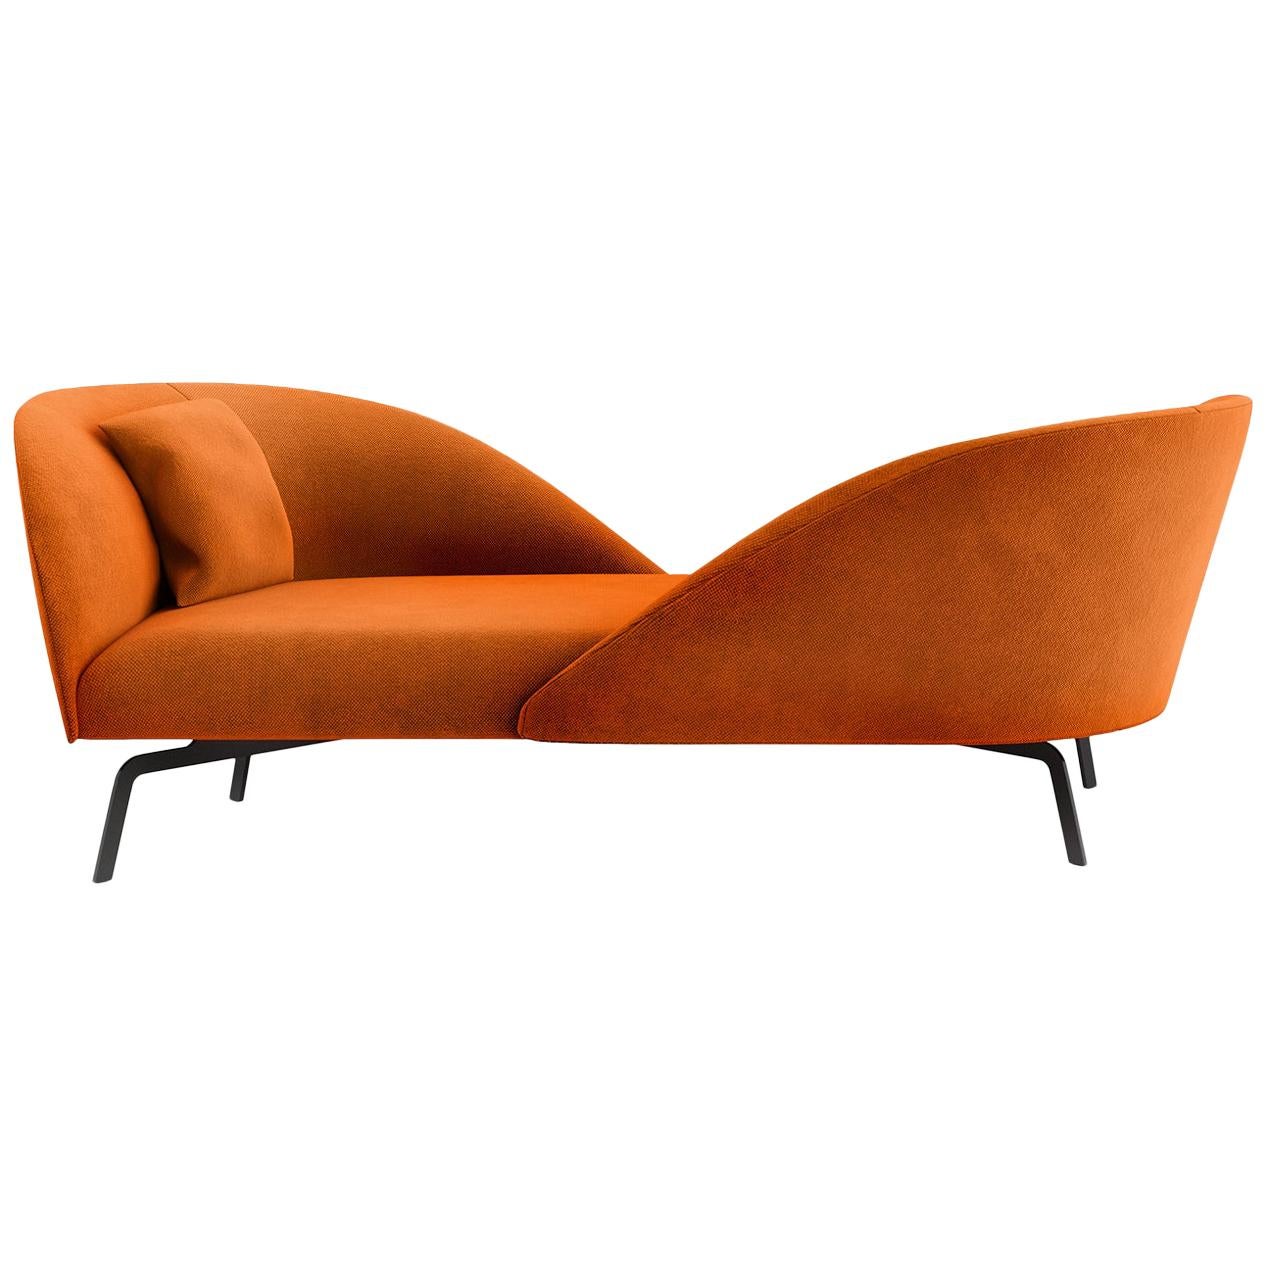 Tacchini Face to Face Sofa with Cushion in Calantha Fabric by Gordon Guillaumier